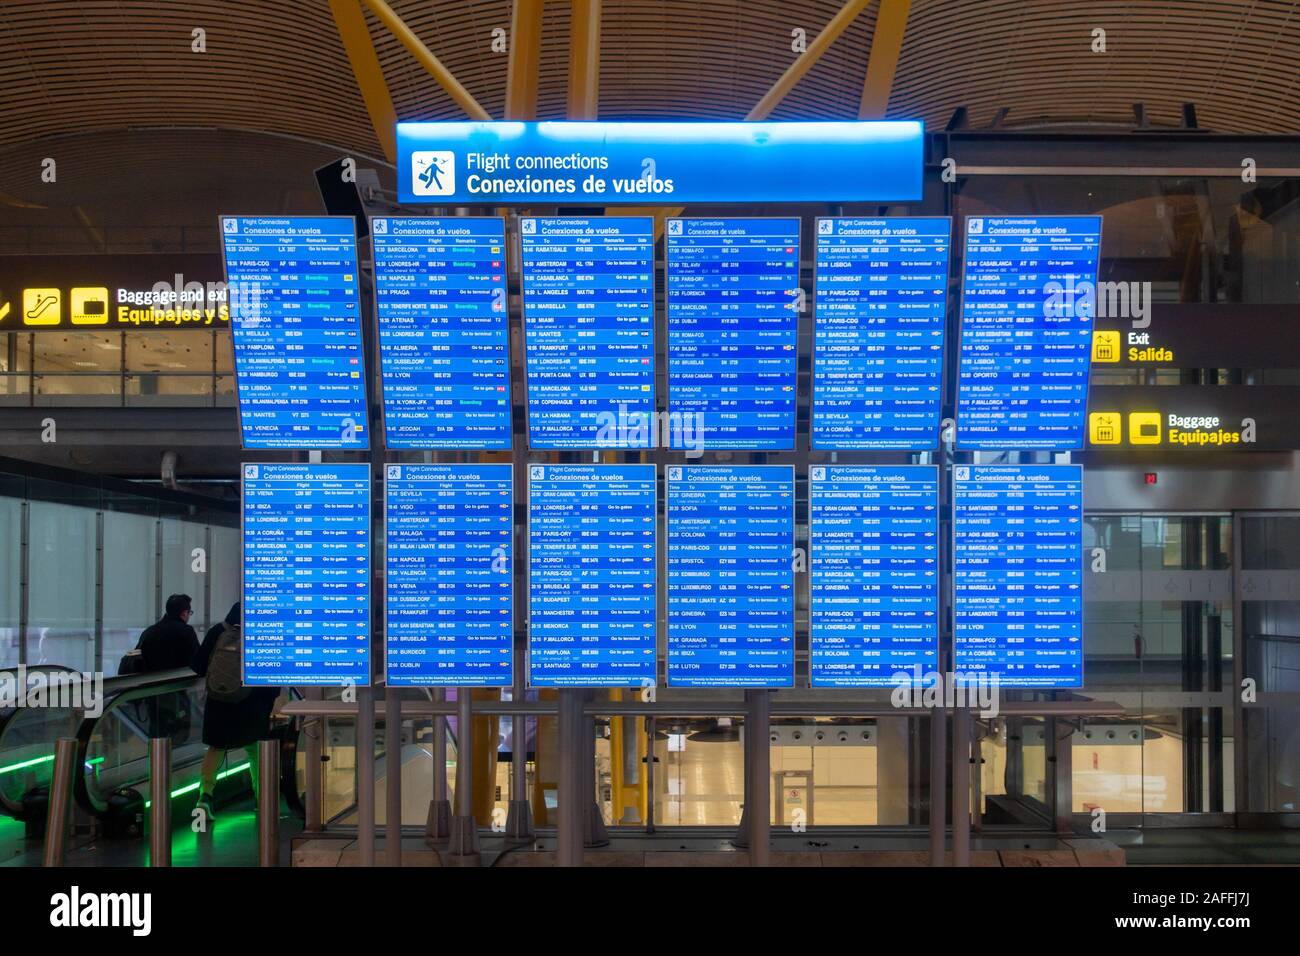 Electronic information screens in Terminal 4 of Madrid-Barajas Adolfo Suárez Airport in Madrid, Spain inform passengers about connecting flights. Stock Photo